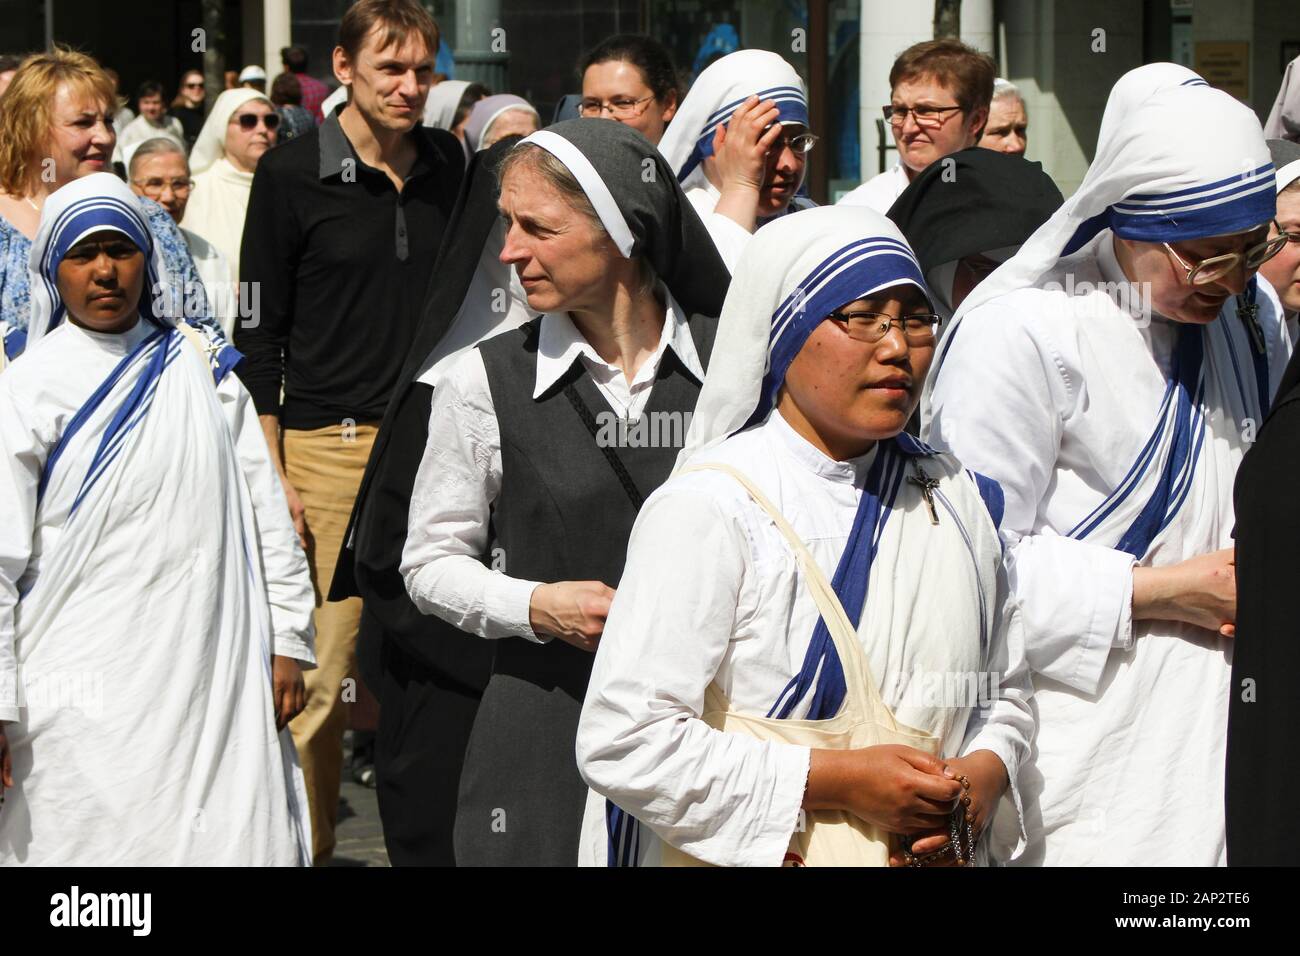 Missionaries of Charity nuns at religious parade in Vilnius, Lithuania Stock Photo